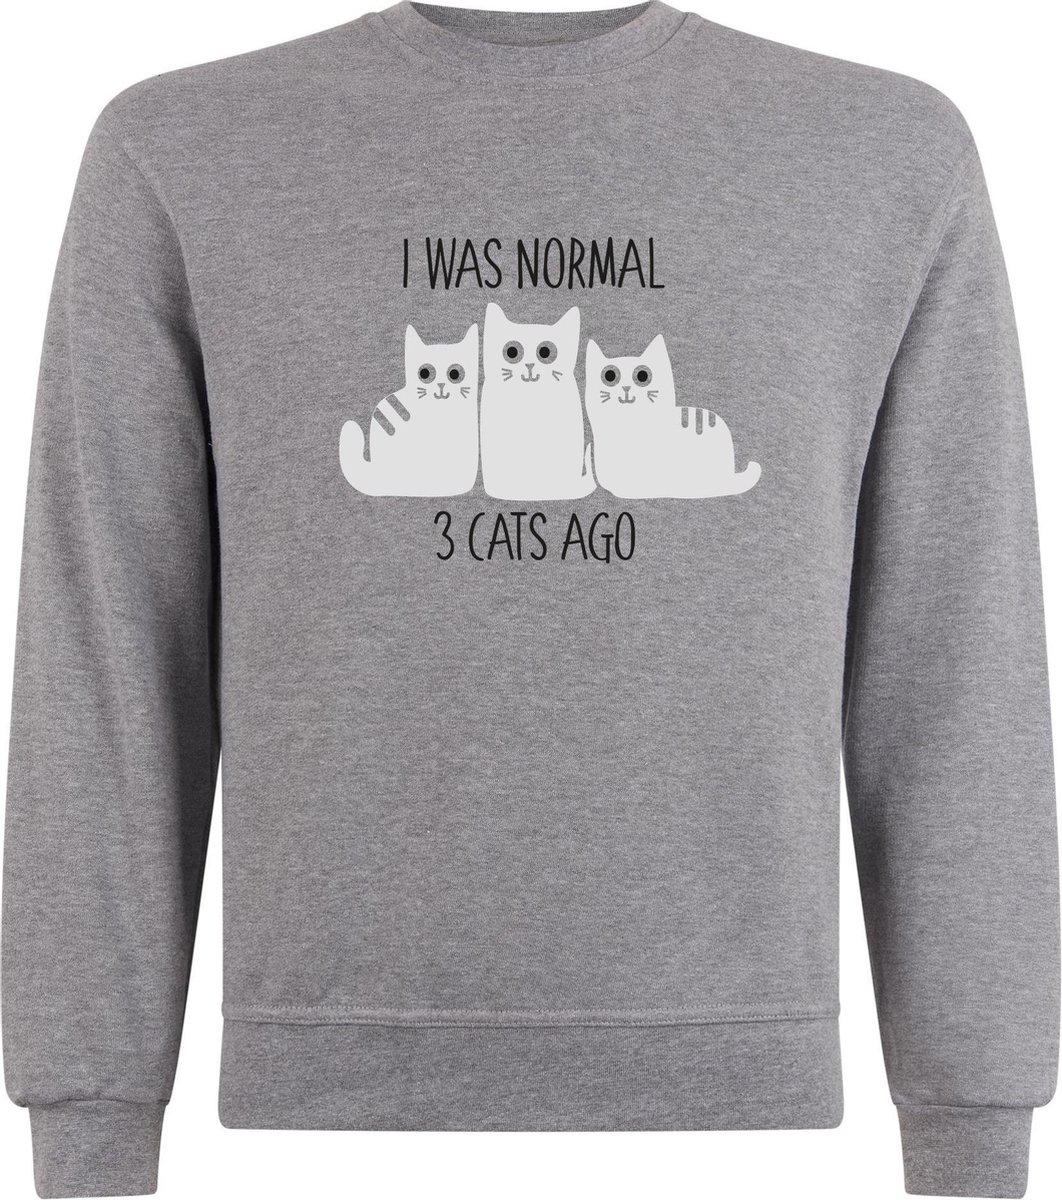 Sweater zonder capuchon - Jumper - Trui - Vest - Lifestyle sweater - Chill Sweater - Kat - Cat - I was normal 3 cats ago - S.Grey - XS